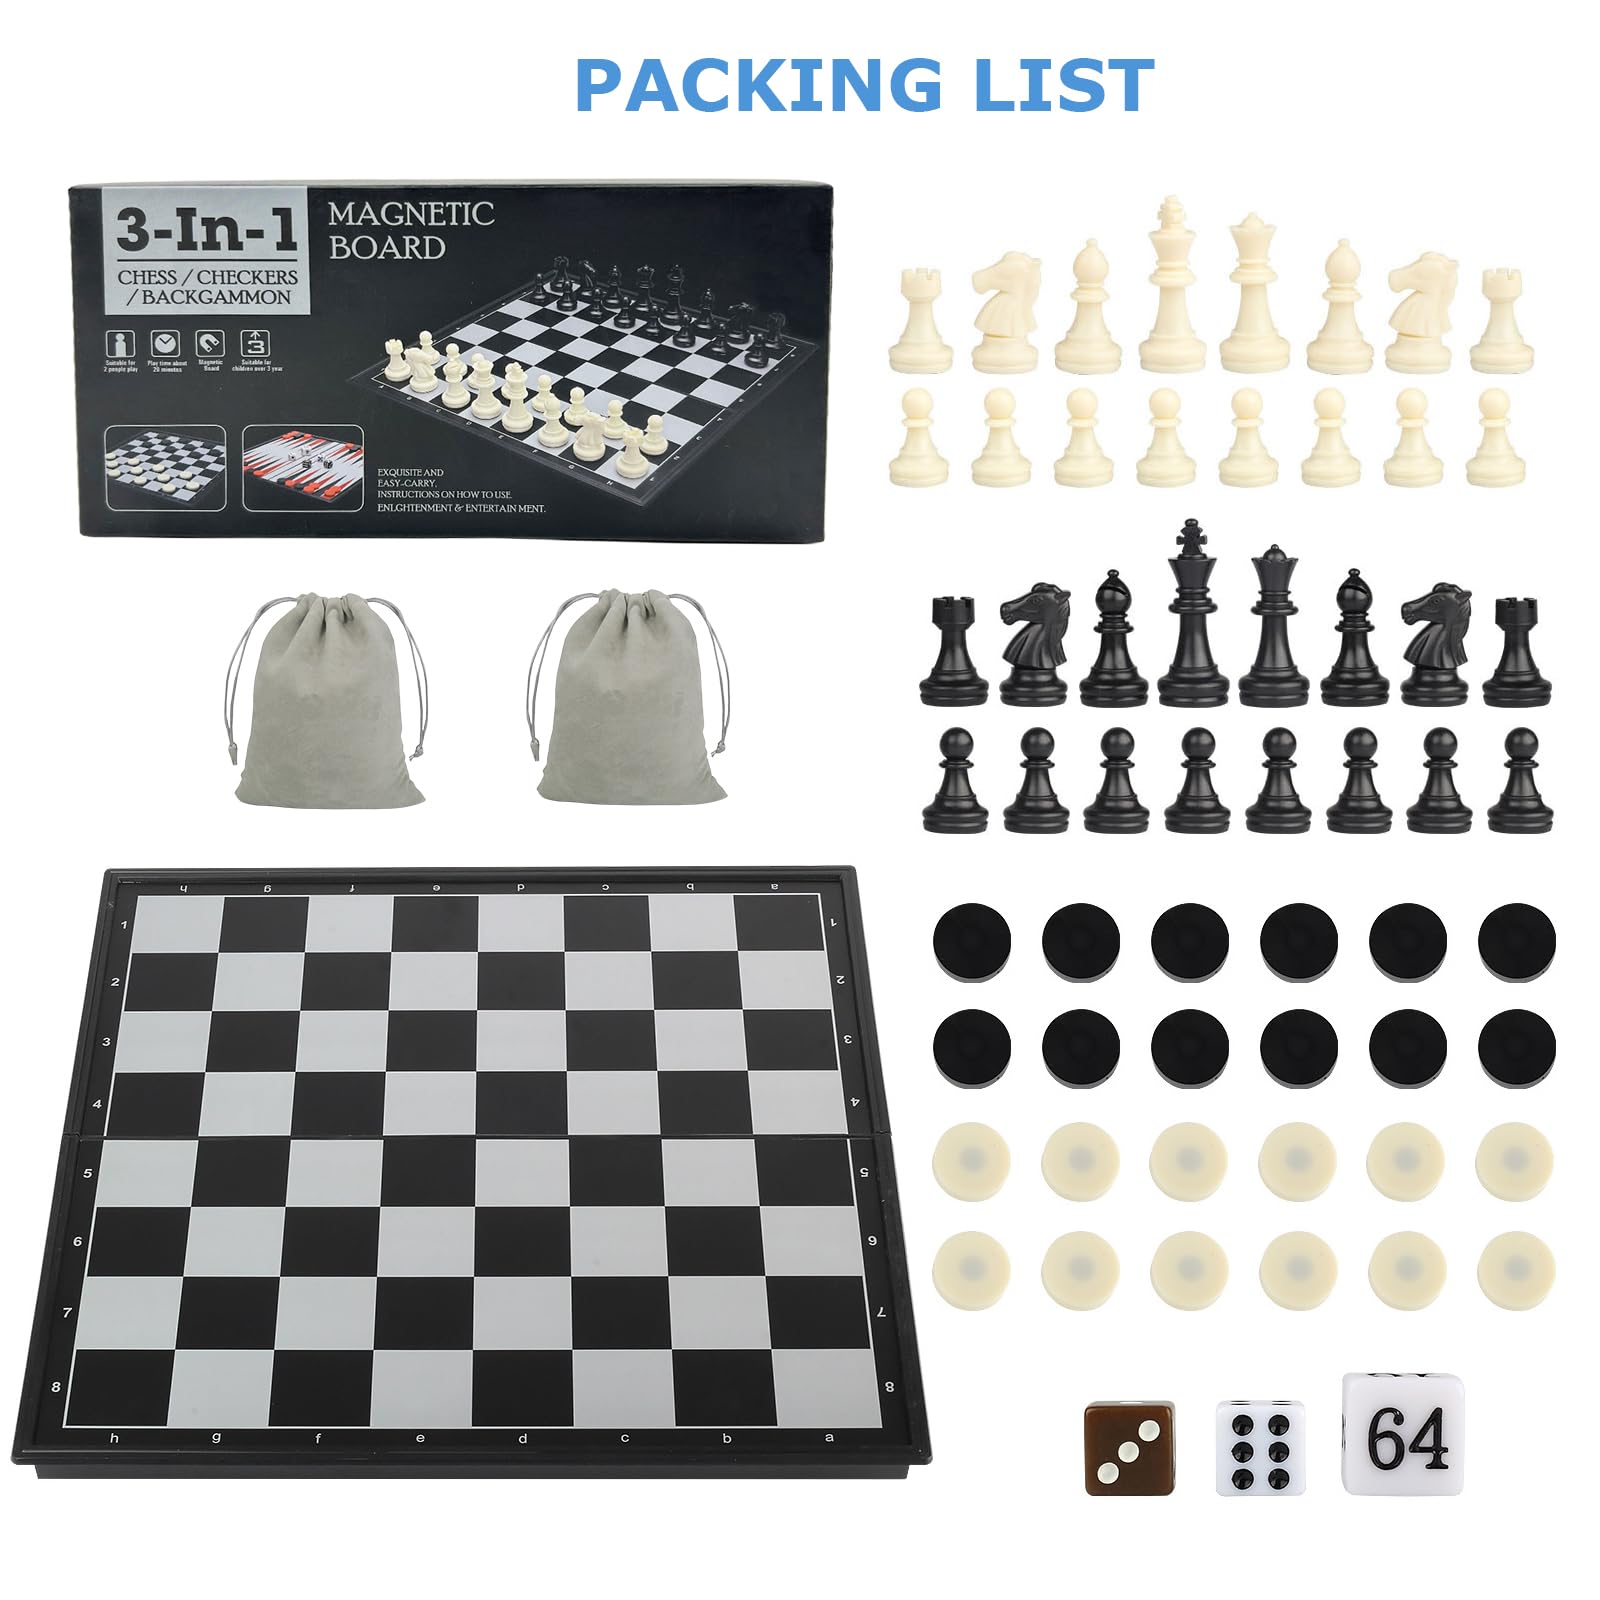 3 in 1 Chess Checkers Backgammon Set - 9.7 Inches Magnetic Travel Chess Set Portable Folding Board Game - 2 Storage Bag